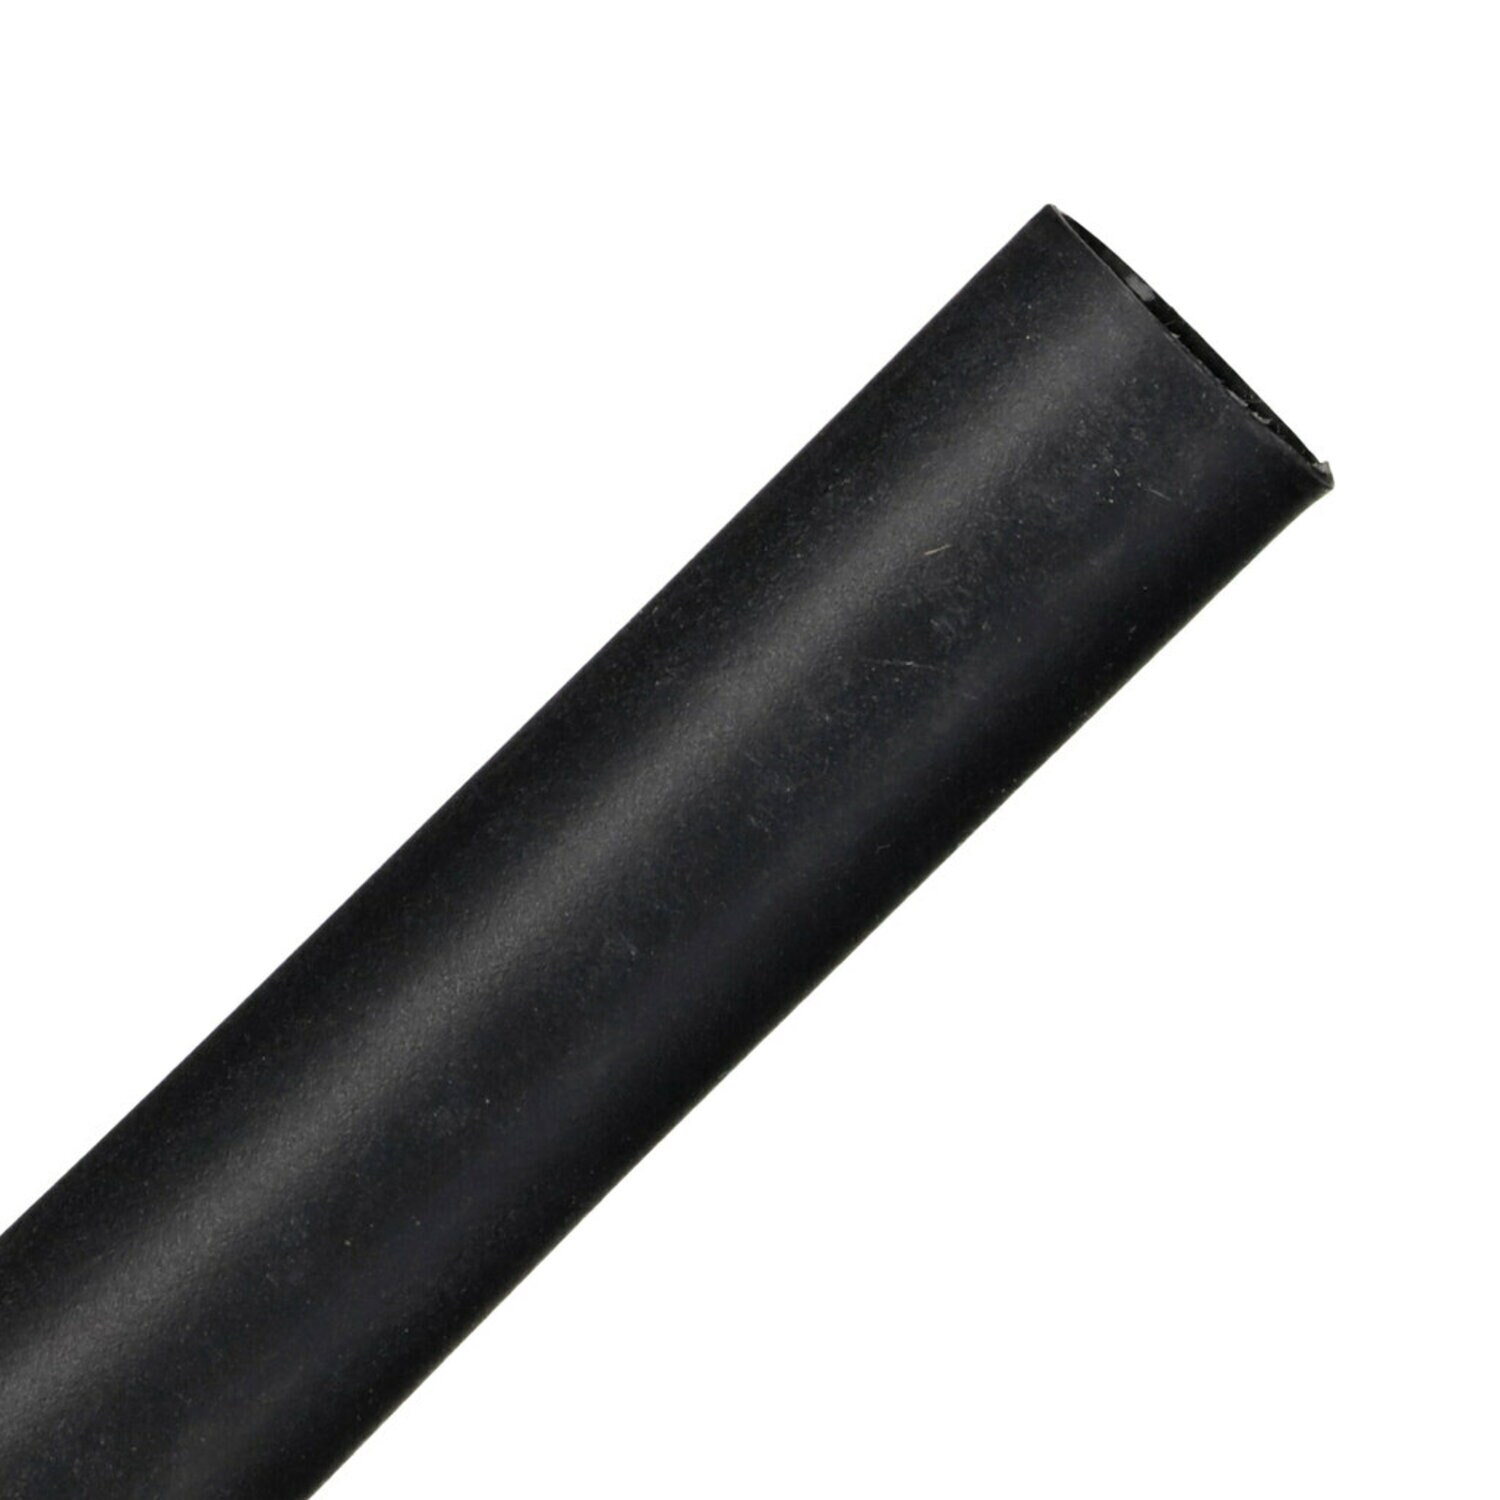 7010398863 - 3M Thin-Wall Heat Shrink Tubing EPS-300, Adhesive-Lined, 3/8" Black
48-in sticks, 12/Case